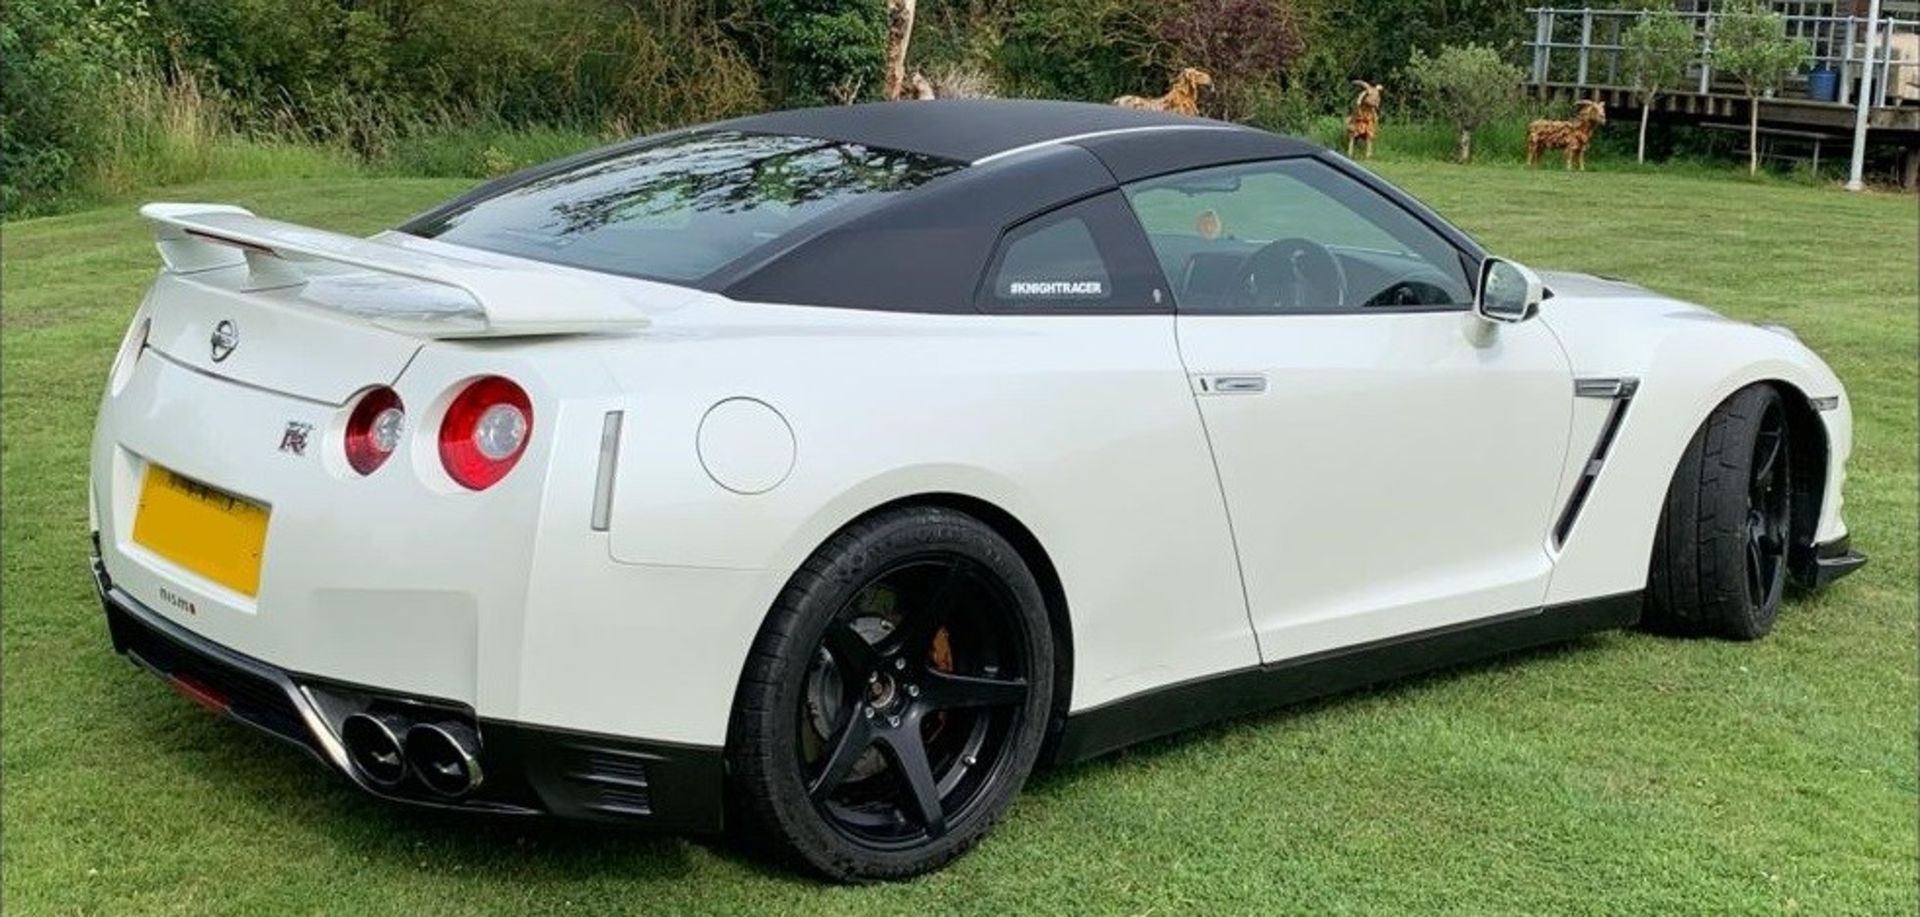 2011/11 REG NISSAN GT-R R35 PREMIUM EDITION S-A ONE FORMER KEEPER FROM NEW 22K MILES - WARRANTED! - Image 7 of 22